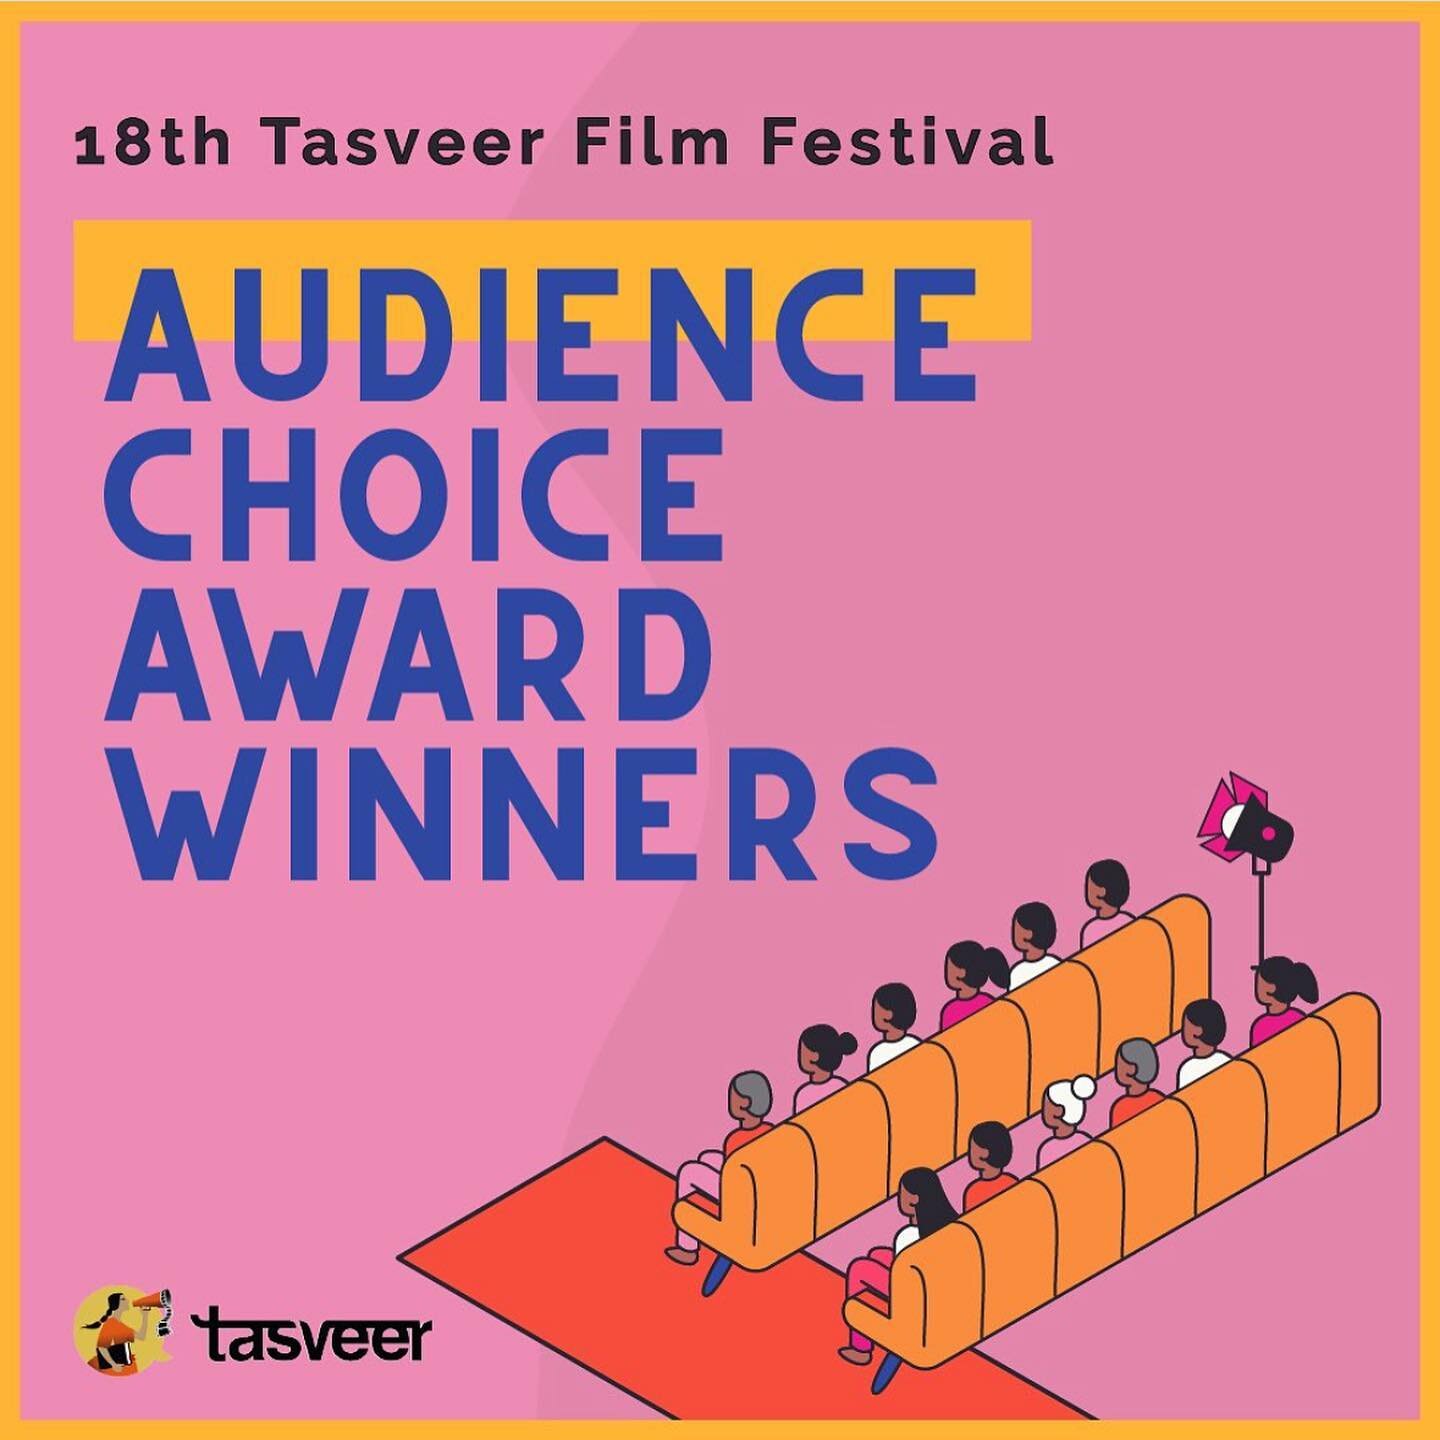 Thank you to the wonderful audience at @tasveerorg for the honor of the Audience Choice Award for Best Narrative Short! We 💛 you!